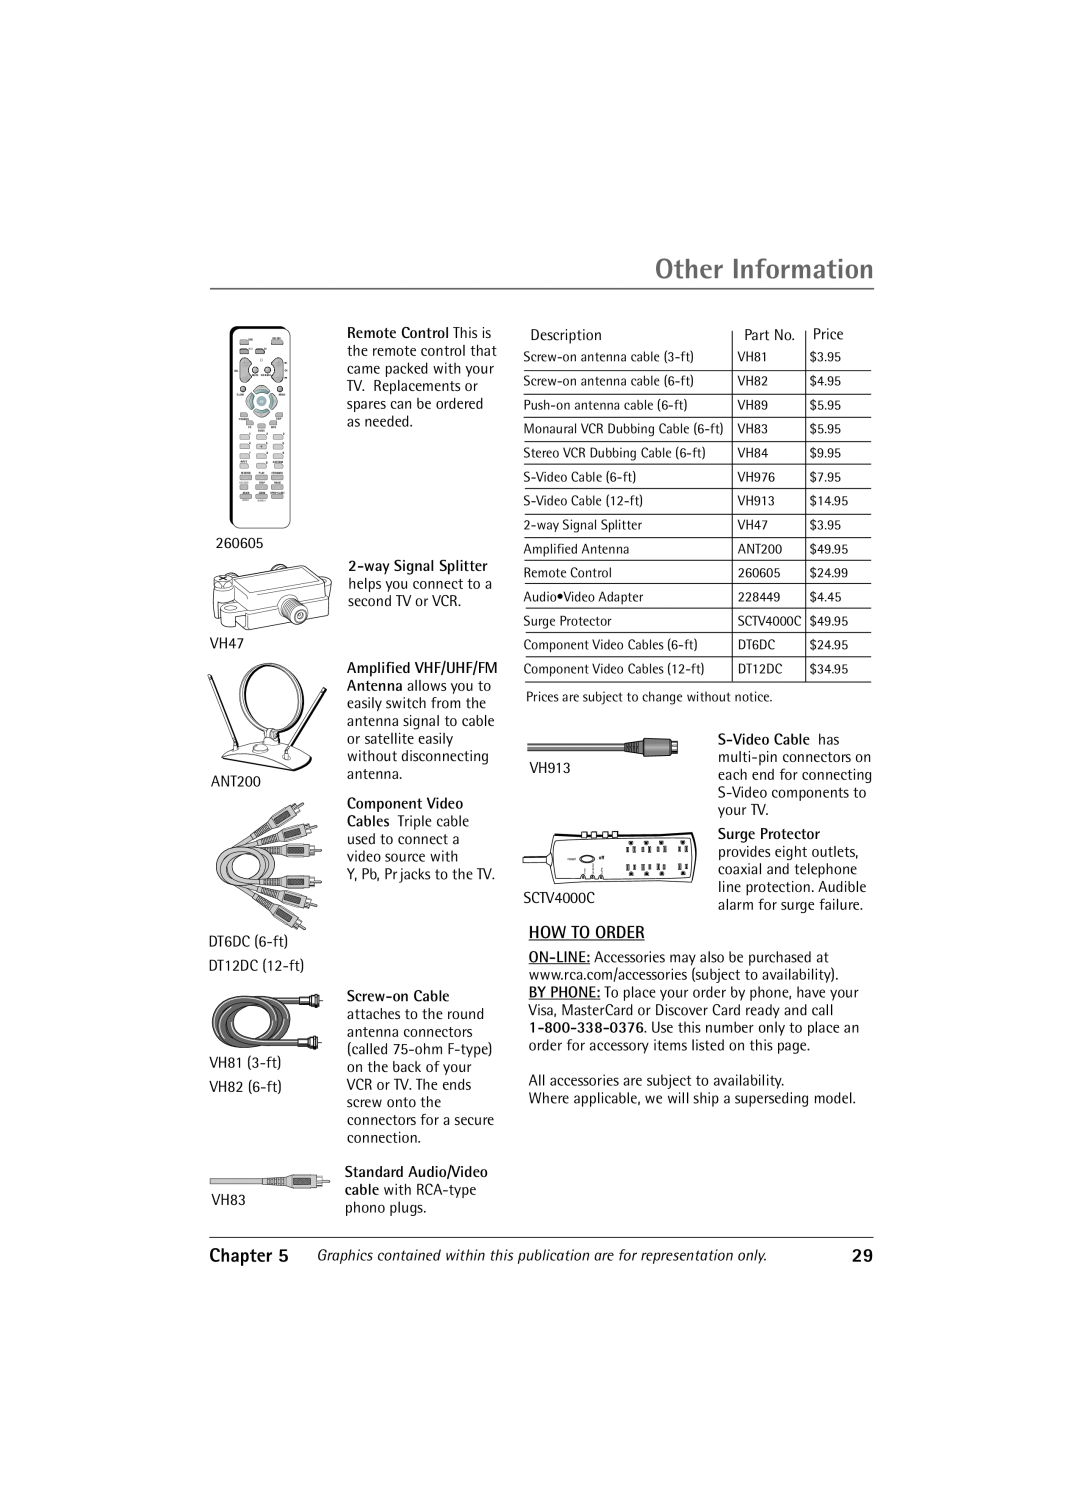 RCA 36V430T How To Order, Other Information, Chapter, 260605 VH47, Description, Price, ANT200, Y, Pb, Pr jacks to the TV 